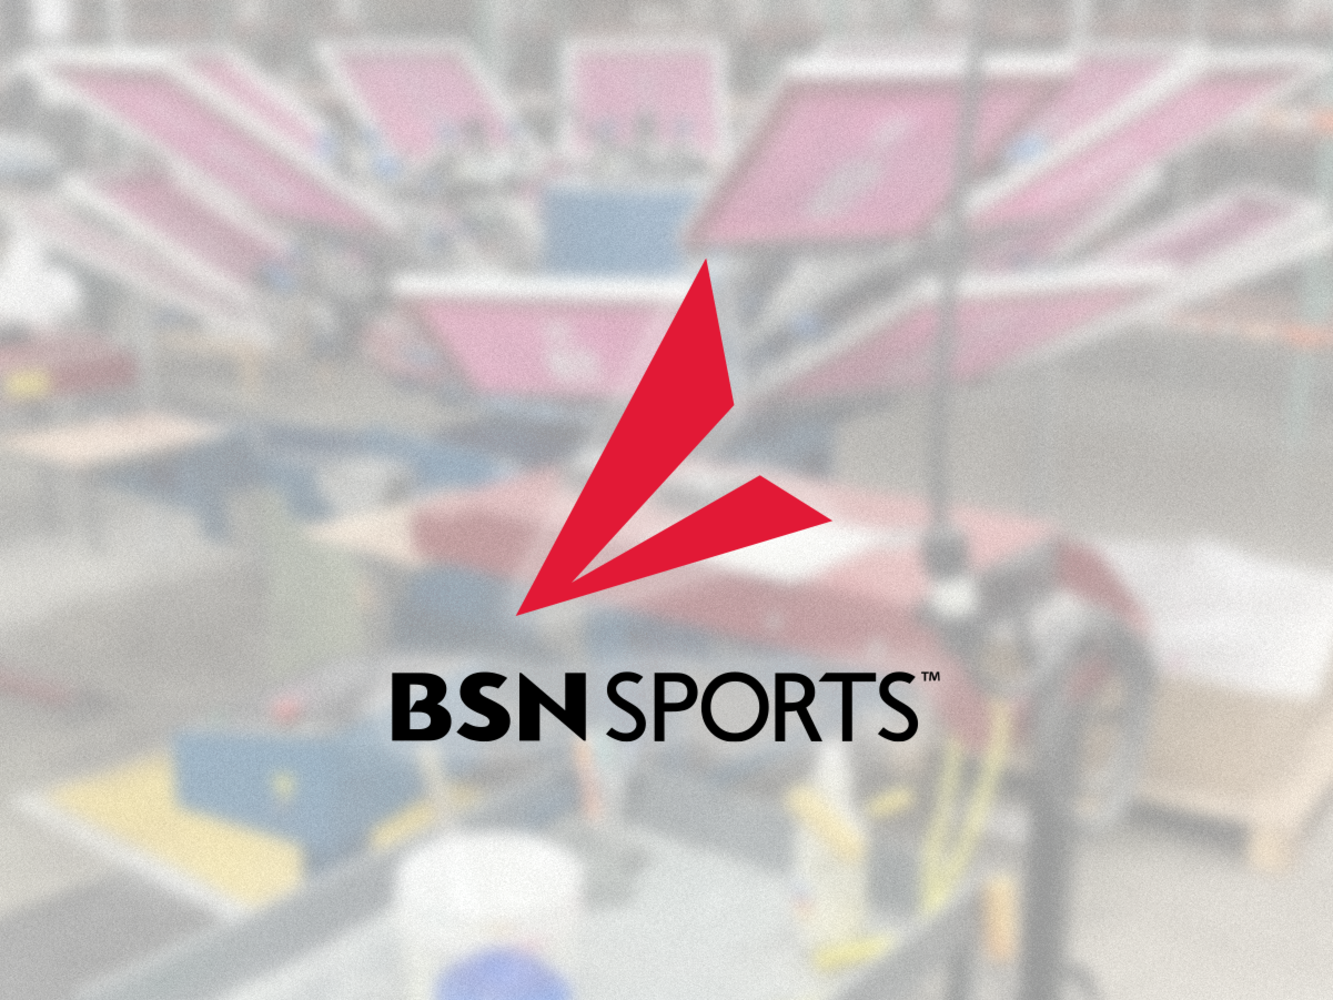 Screen Printing Equipment and Embroidery Machines - surplus to the ongoing operations of BSN Sports - Closing Wausau, WI location only